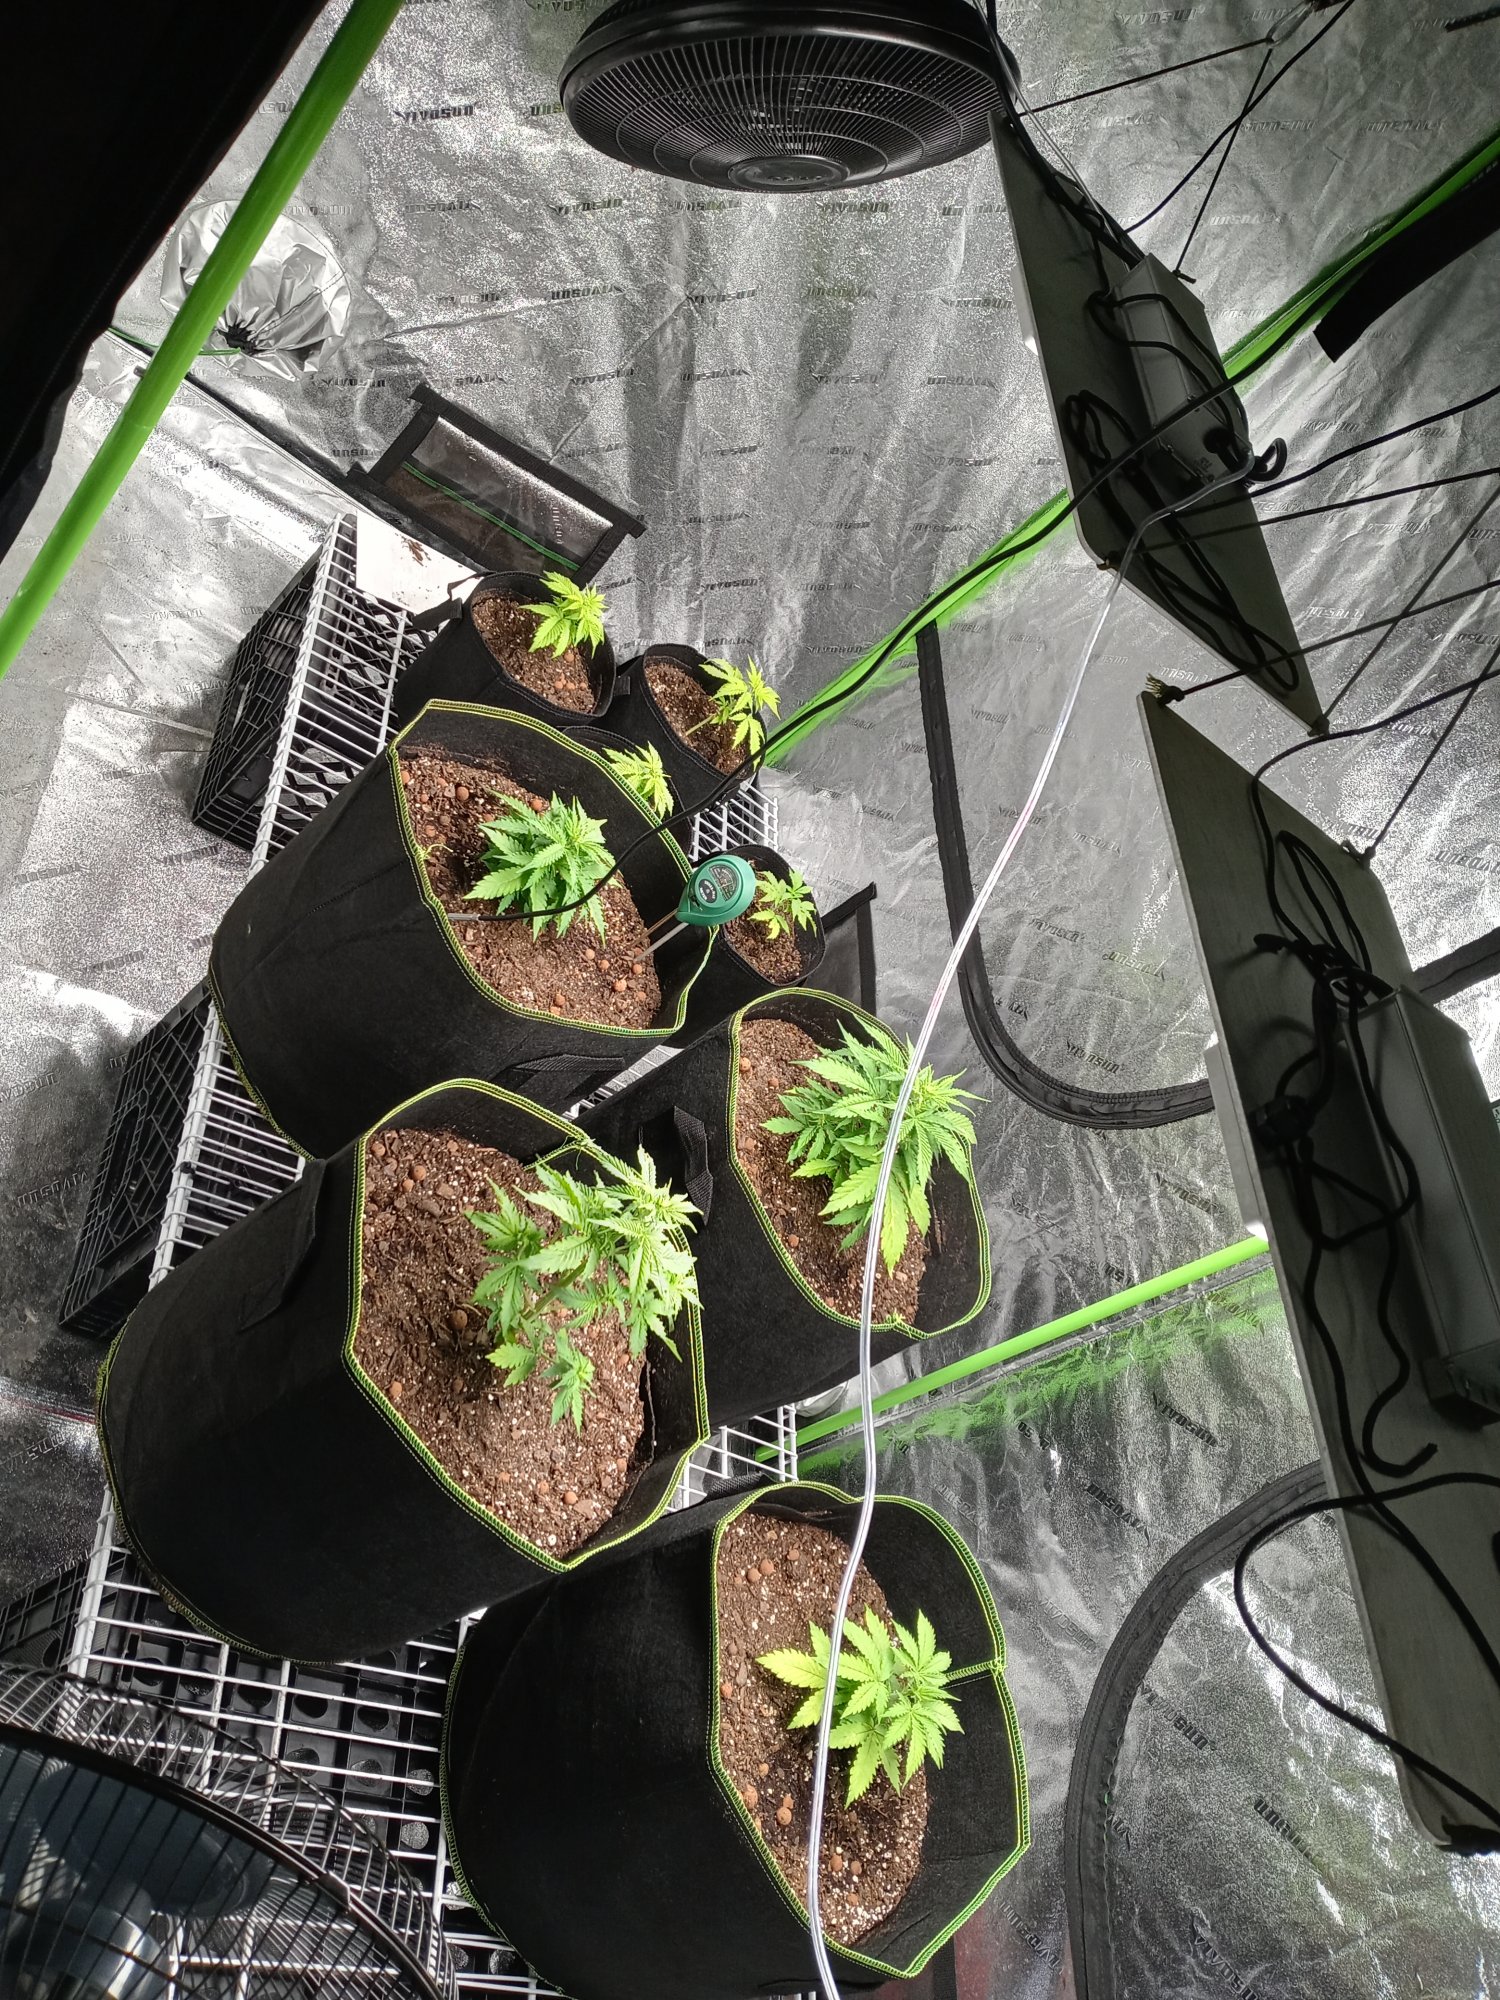 Update transplanted girls from over watered 3